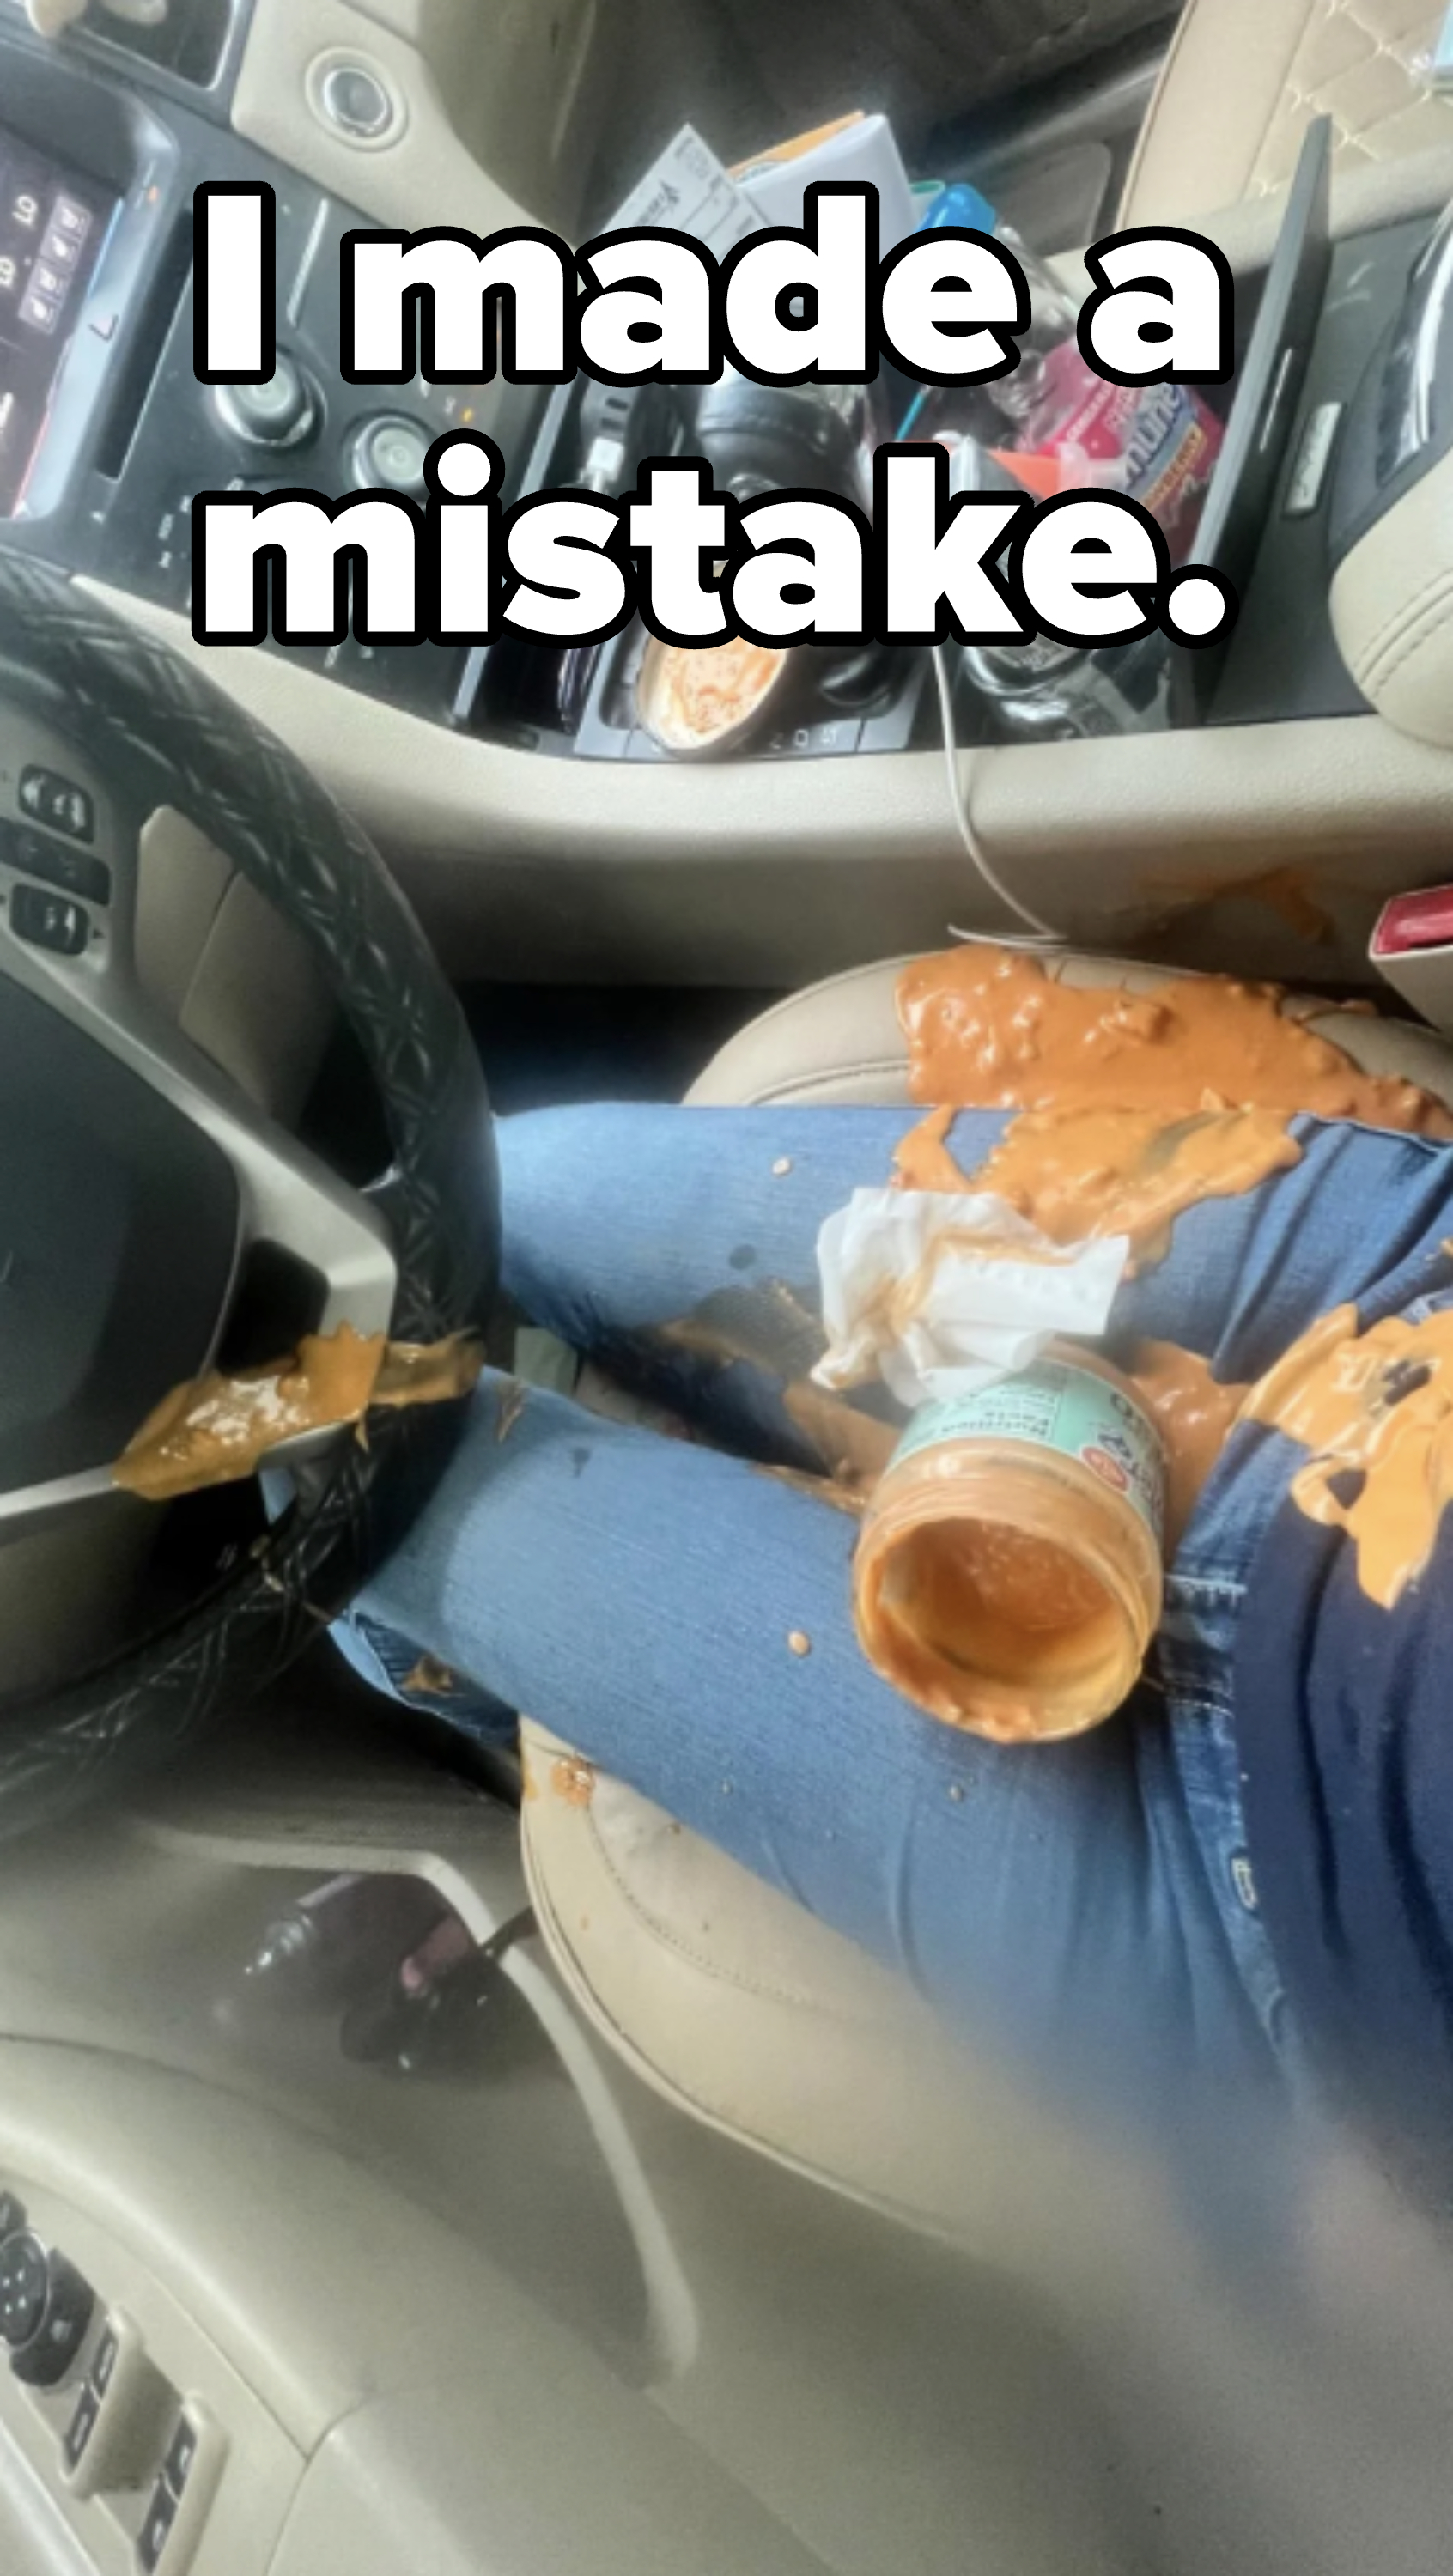 Person&#x27;s lap and car interior with spilled sauce and a jar.
